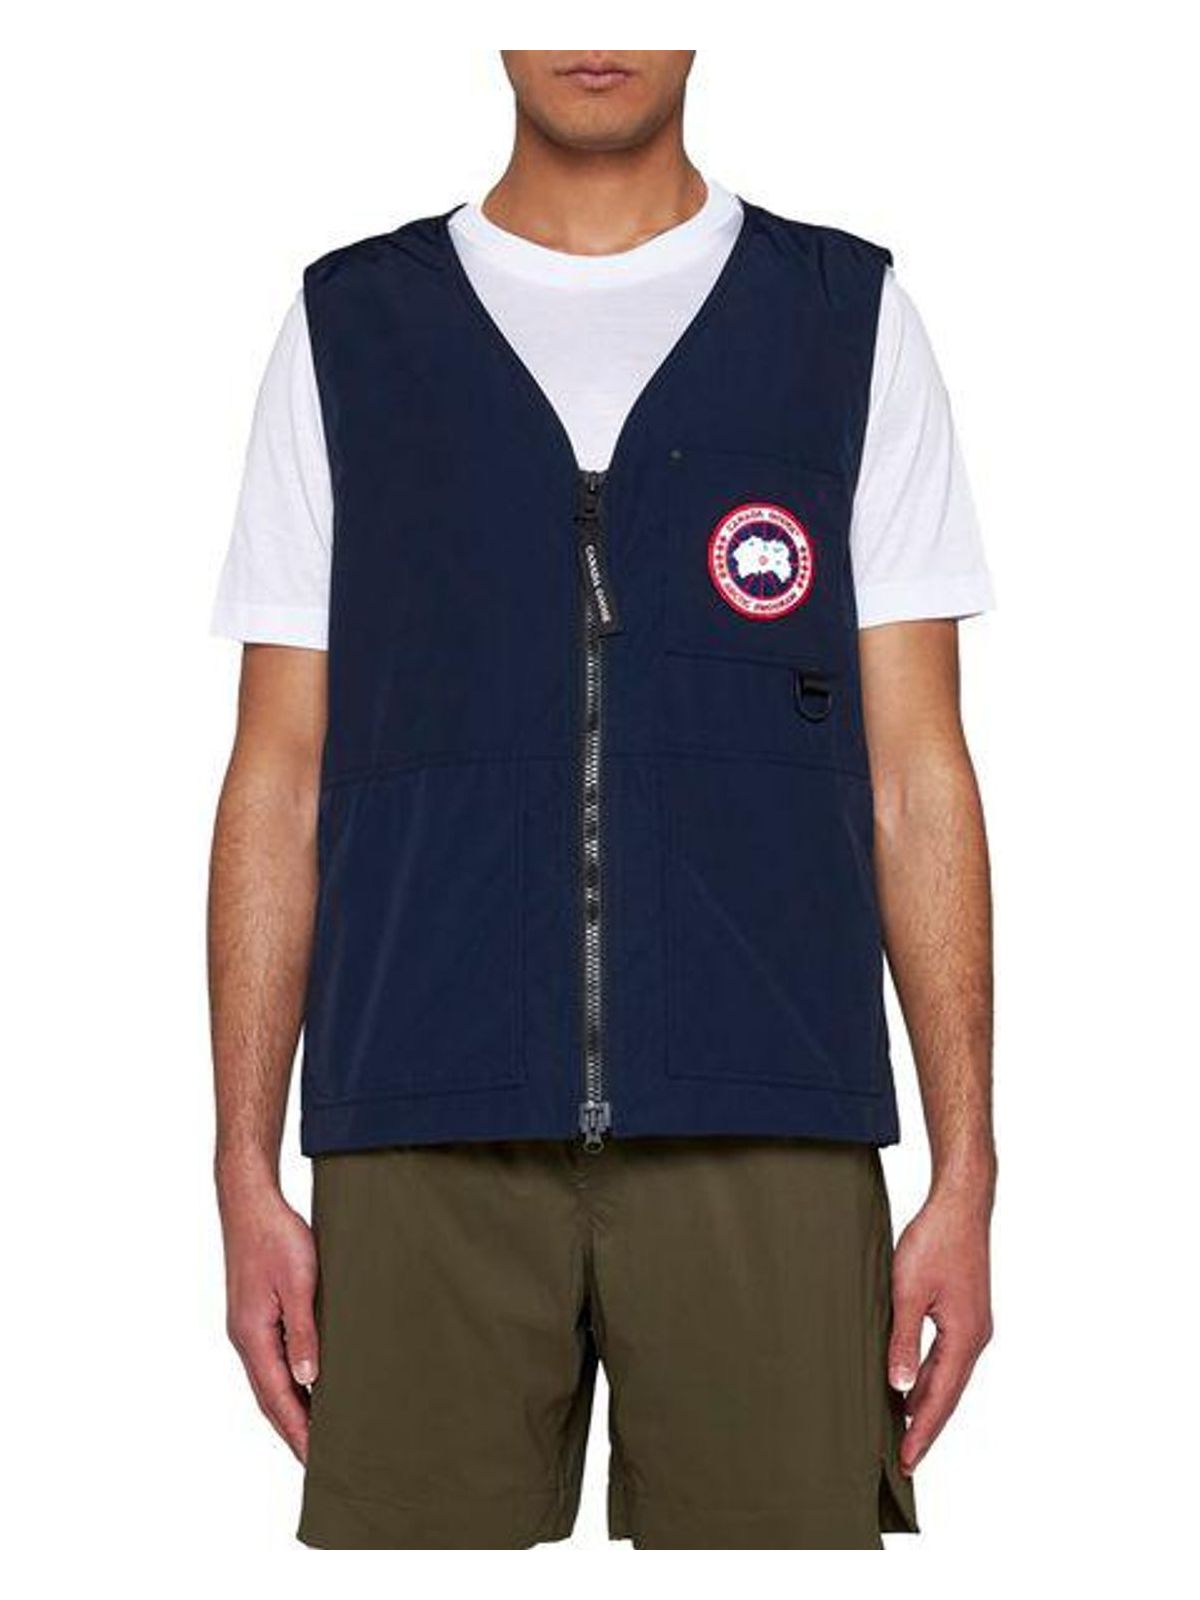 63 CANADA GOOSE CANMORE VEST